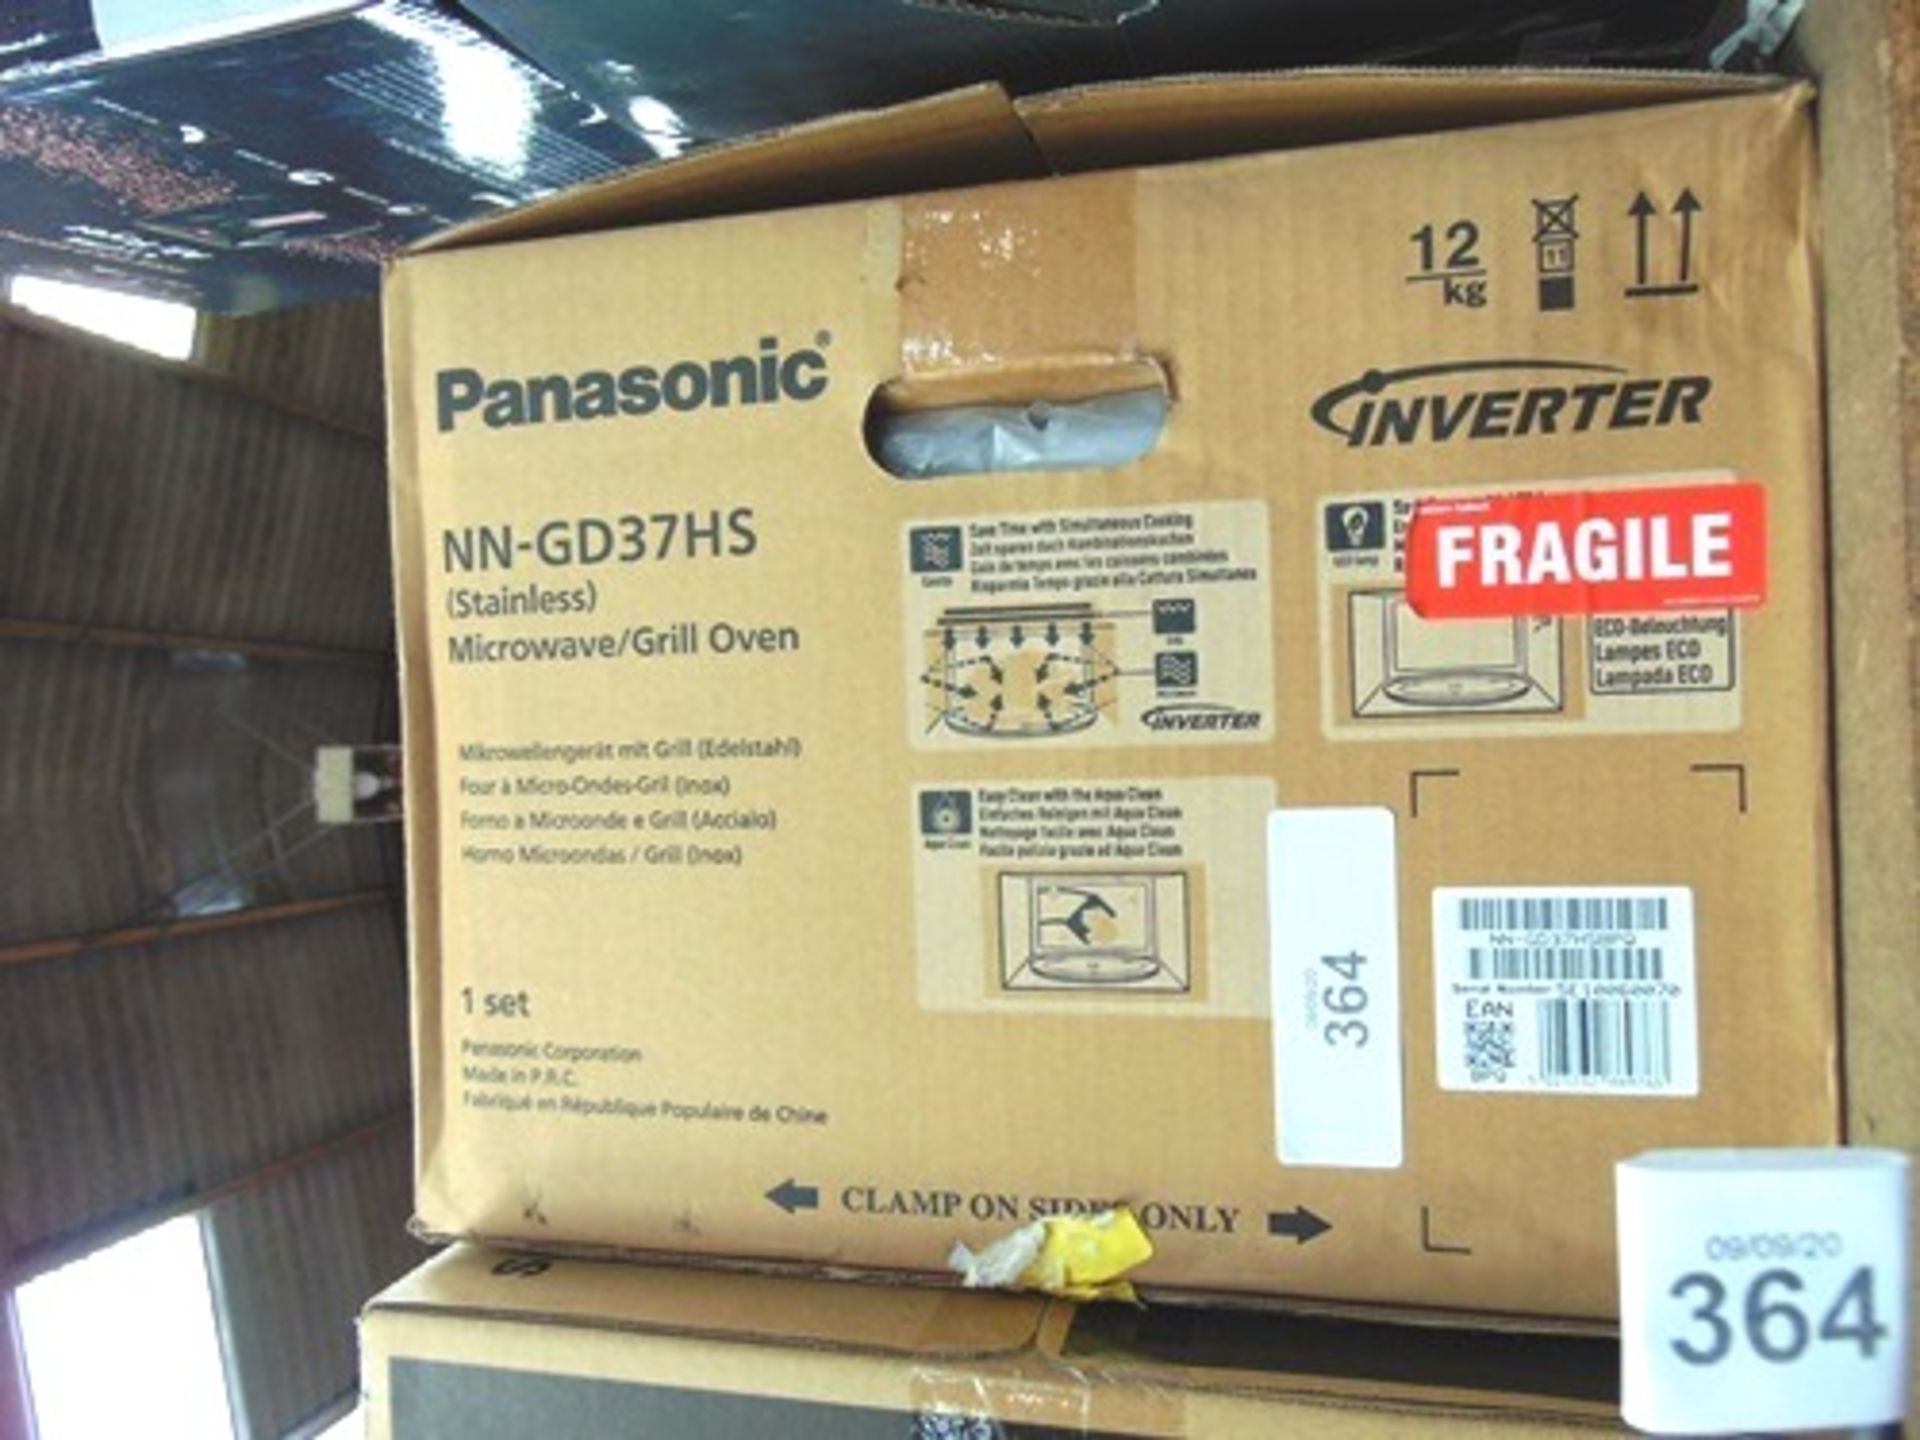 Panasonic inverter microwave/grill oven, NN-GD37HS, 1000W, stainless steel, 23ltr - New in box (